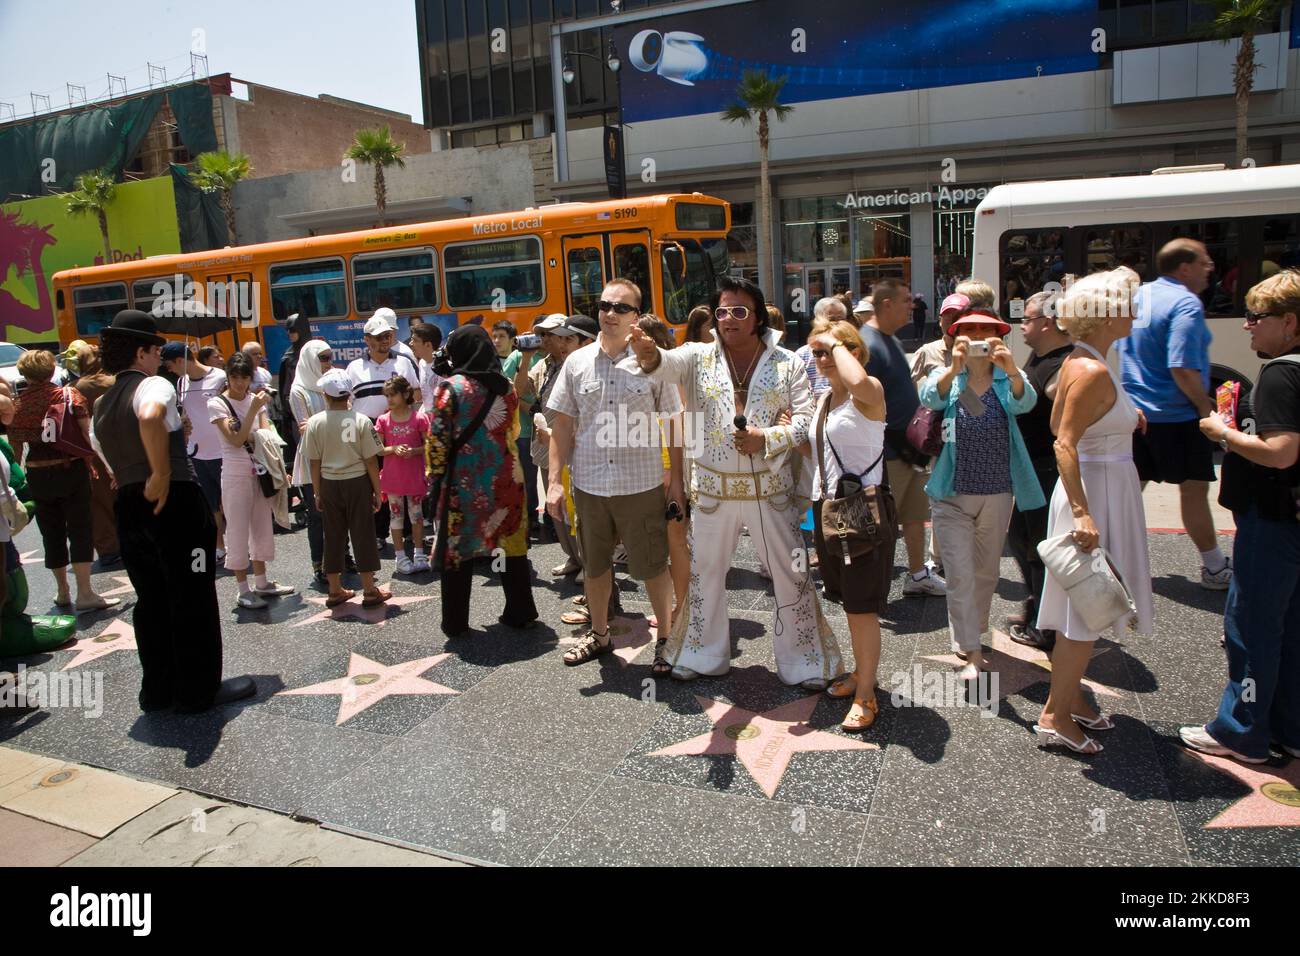 Hollywood, USA - July 5, 2008: actors are dressed as Hollywood doubles and offer Photos with tourists for money. Stock Photo